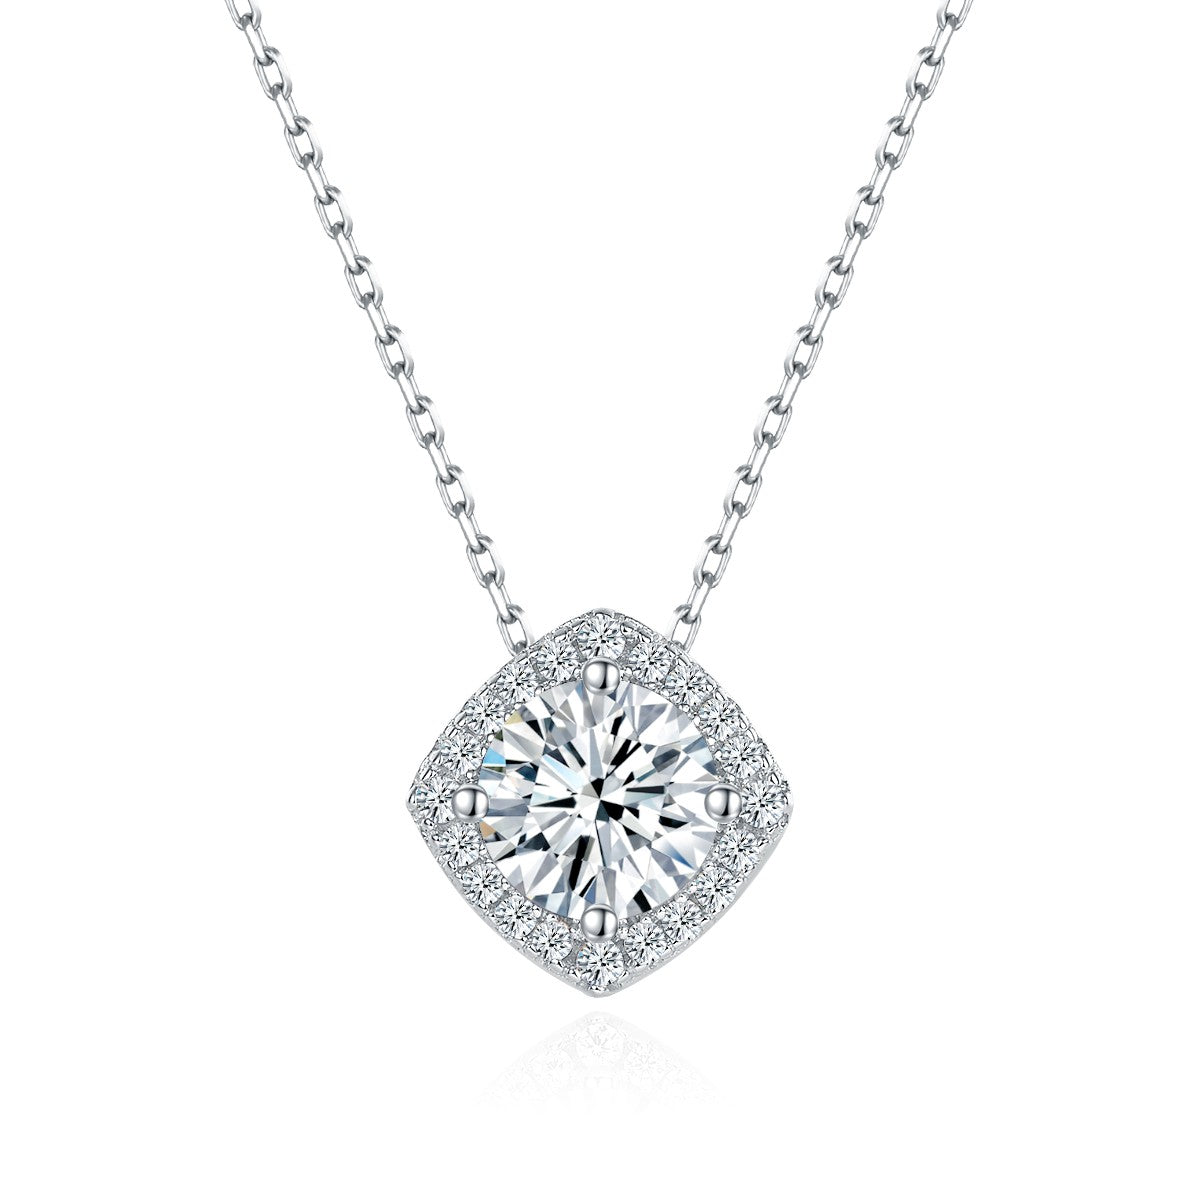 【02LIVE # link 32 - BUY 1 GET 1 free ring 】S925 Silver Moissanite Diamond Square bag Pendant Necklaces PM5008